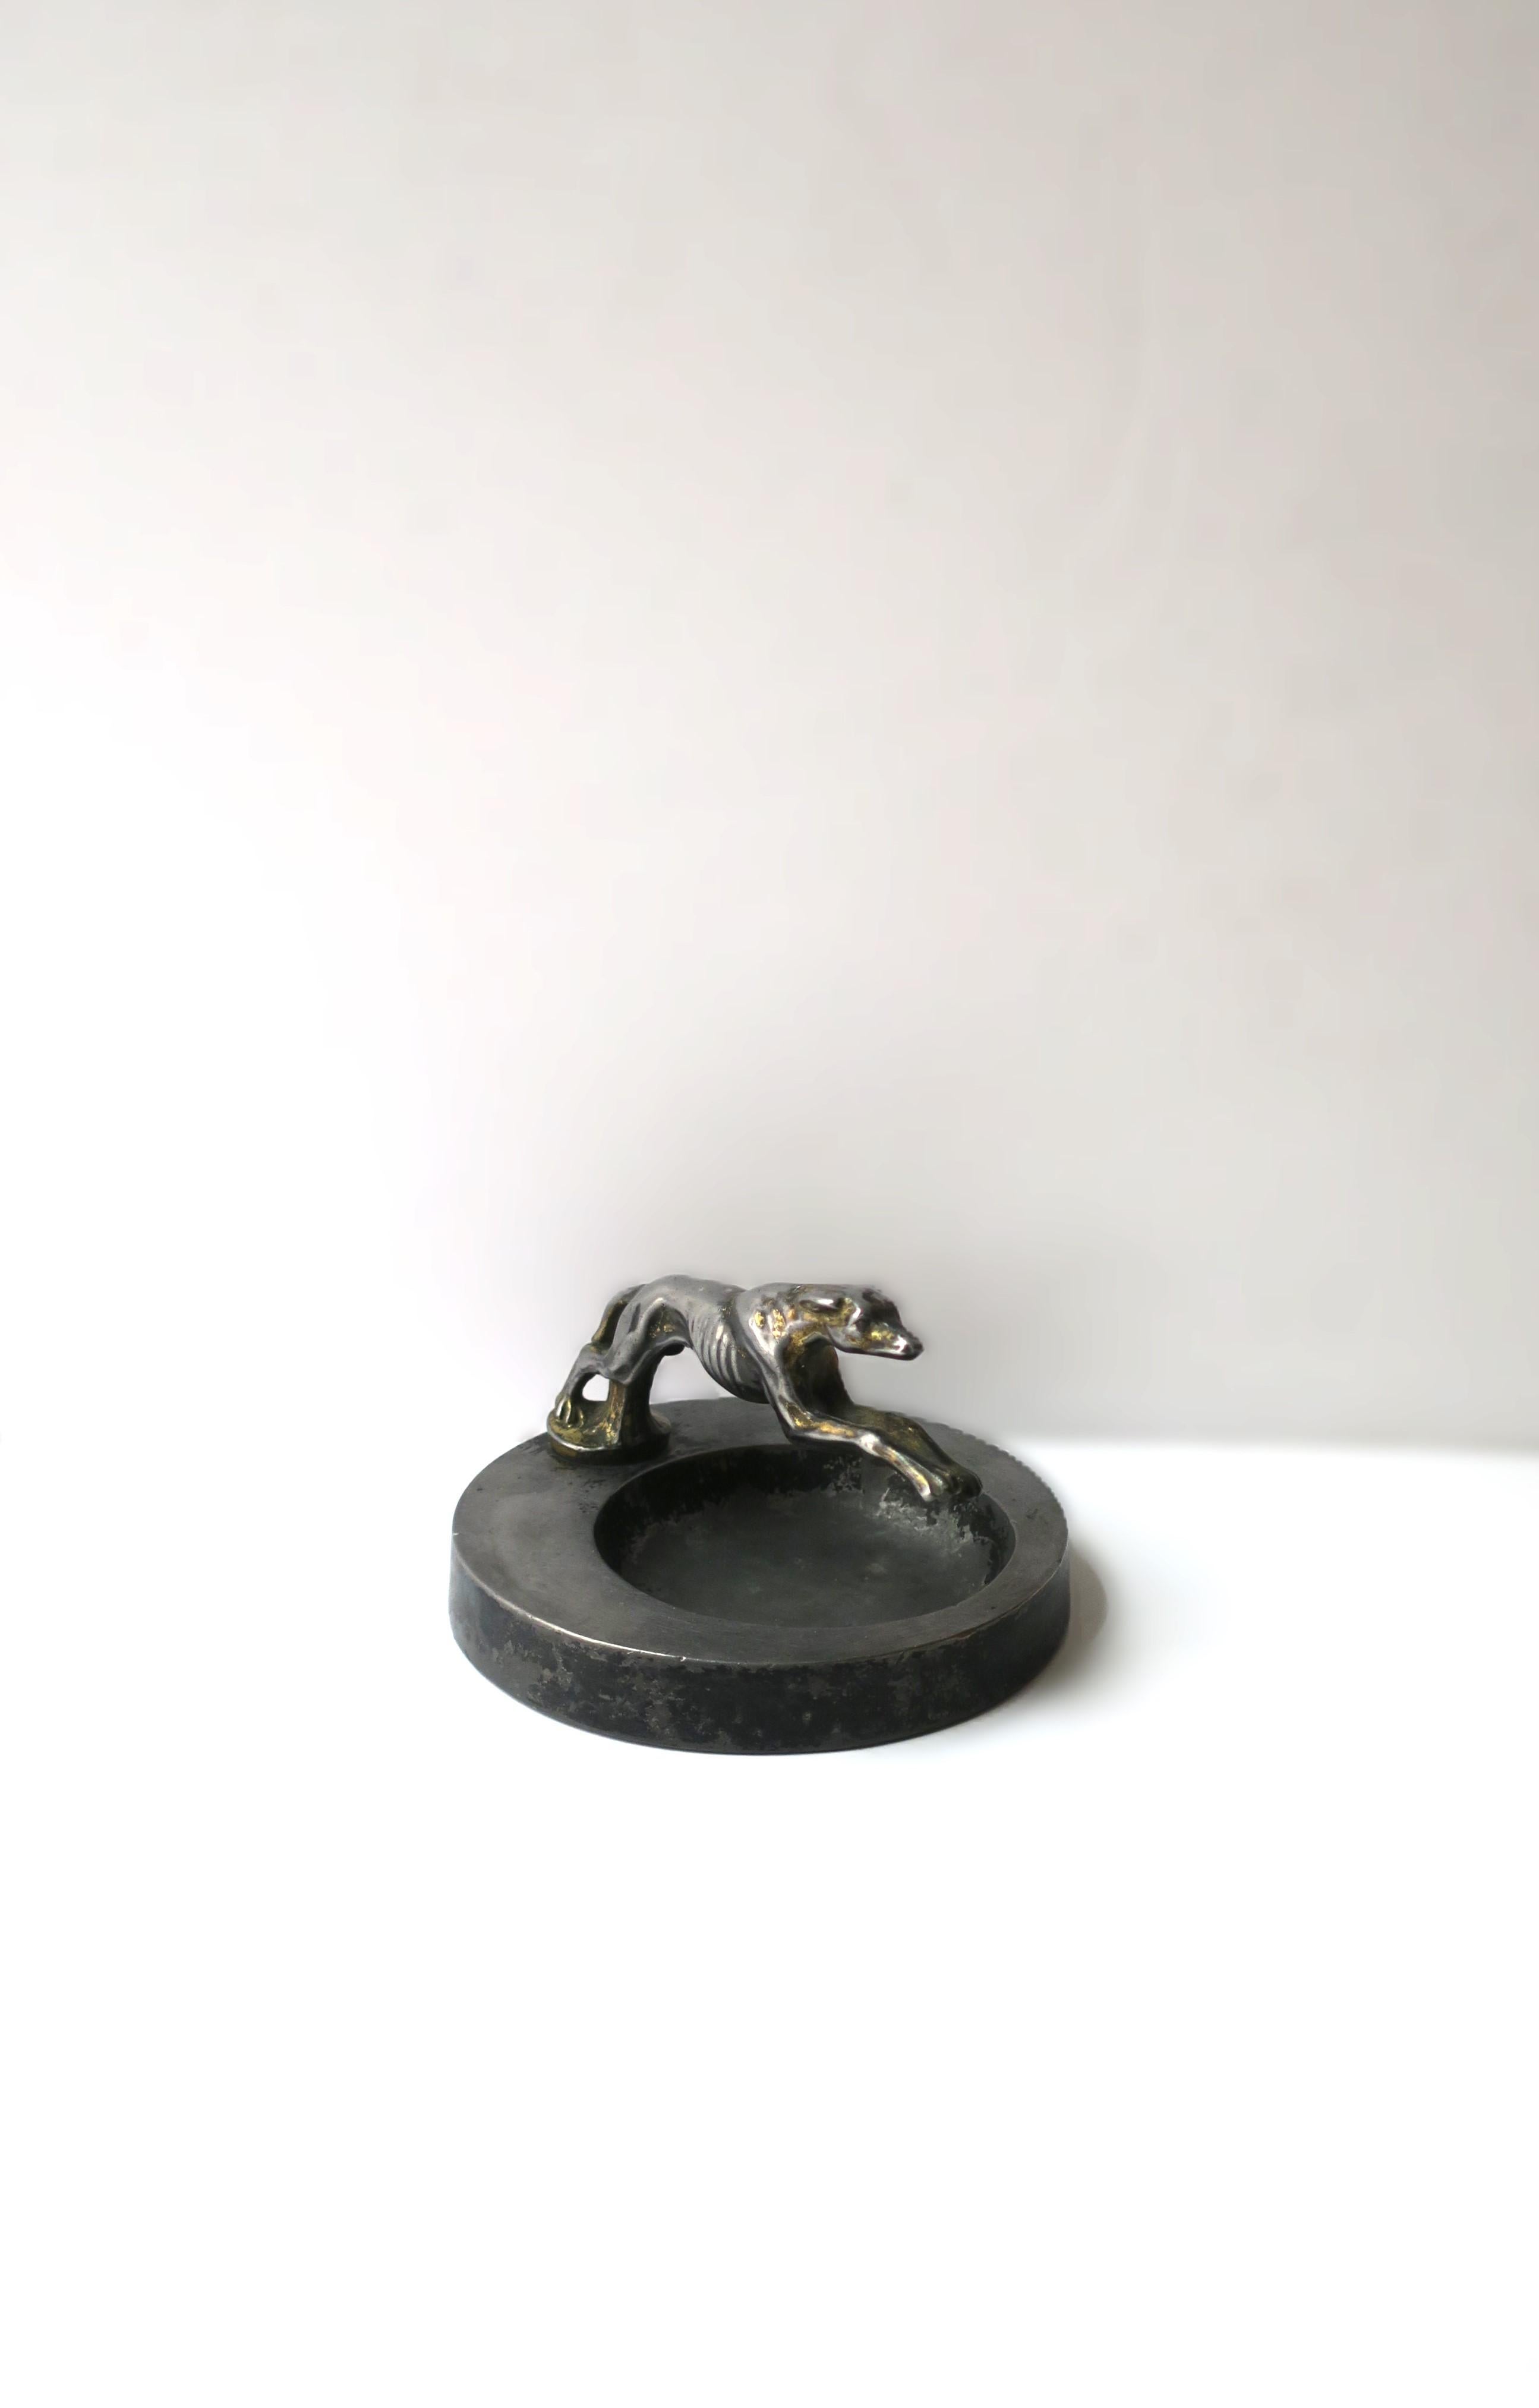 Metal Art Deco Catchall Vide-Poche with Greyhound Whippet Dog Sculpture  For Sale